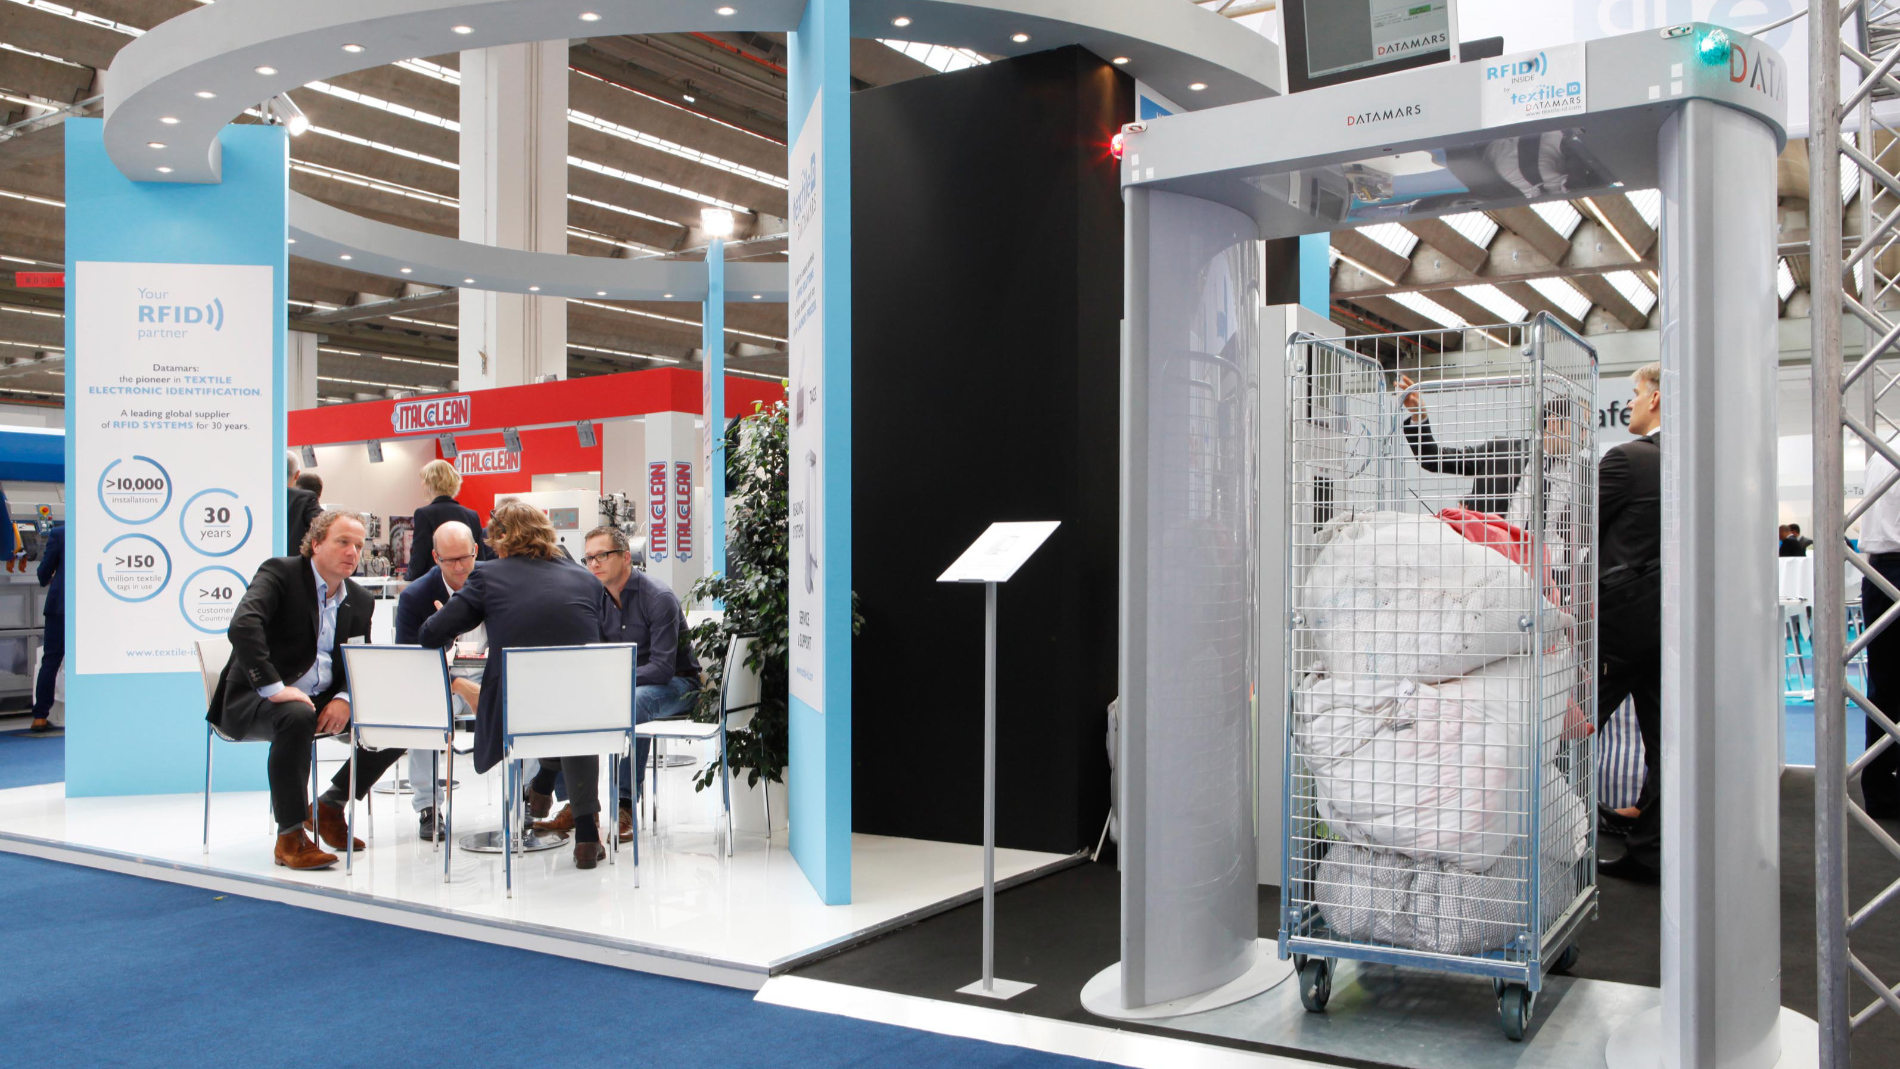 RFID technology remains an important tool for textile-care companies. (Source: Messe Frankfurt Exhibition)